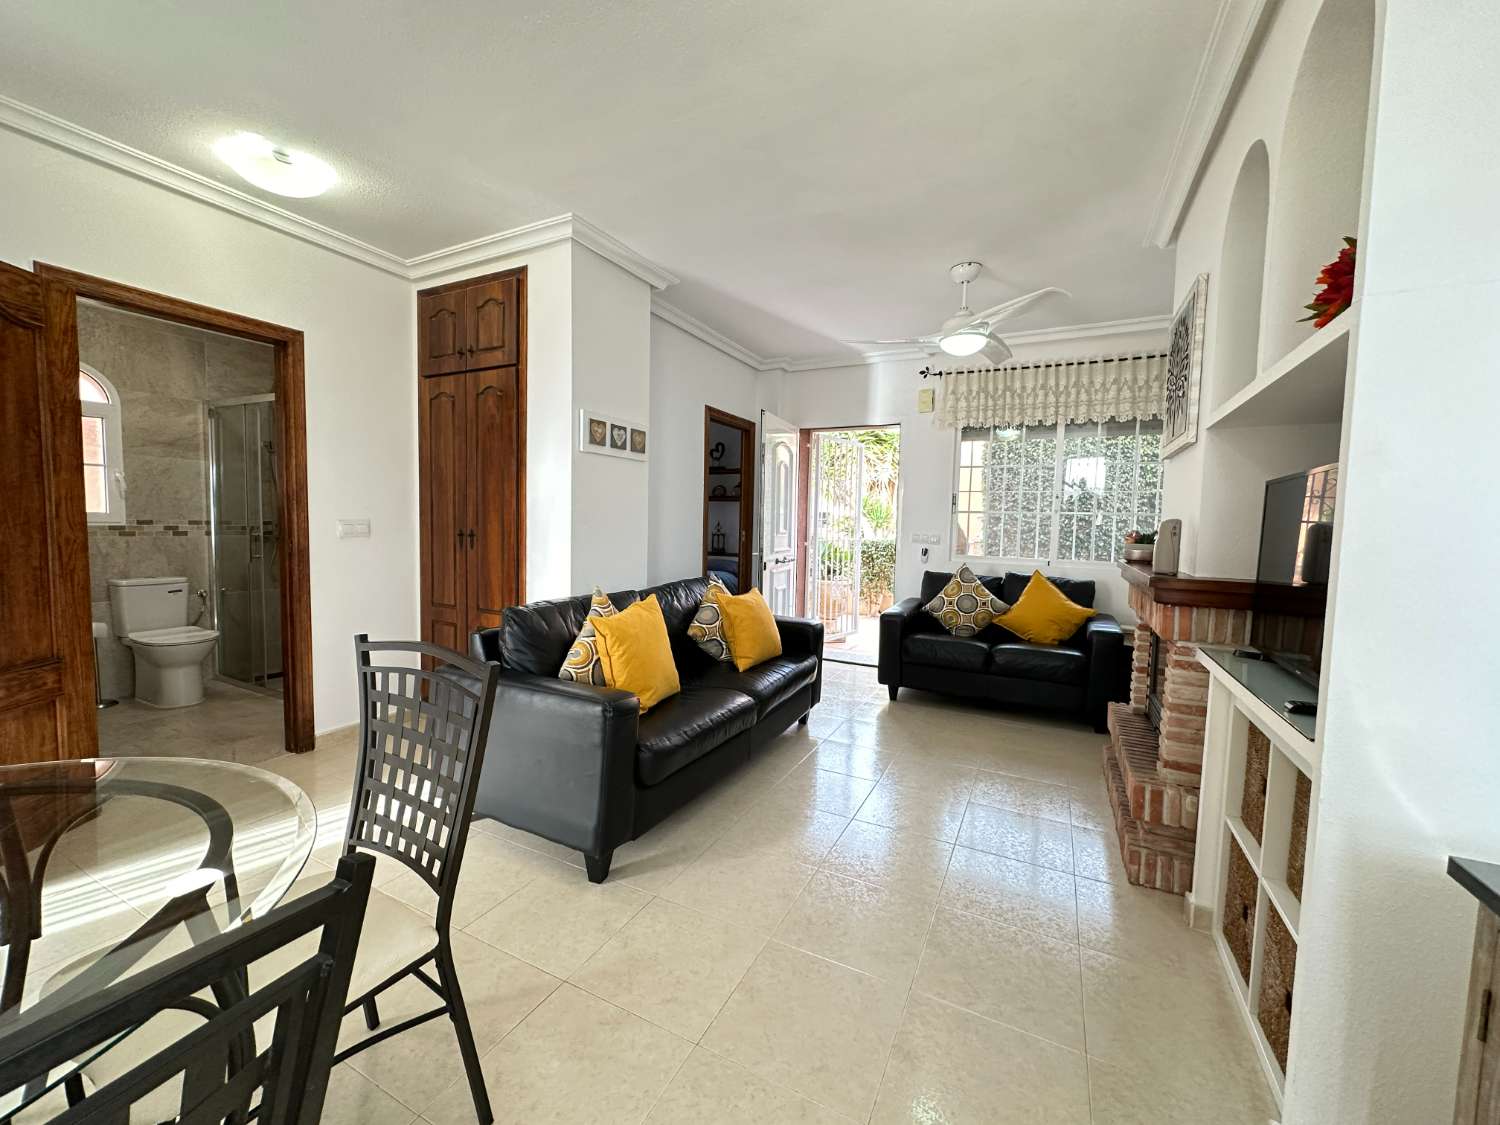 Beautiful detached villa with 3 bedrooms and 2 bathrooms with a private pool.